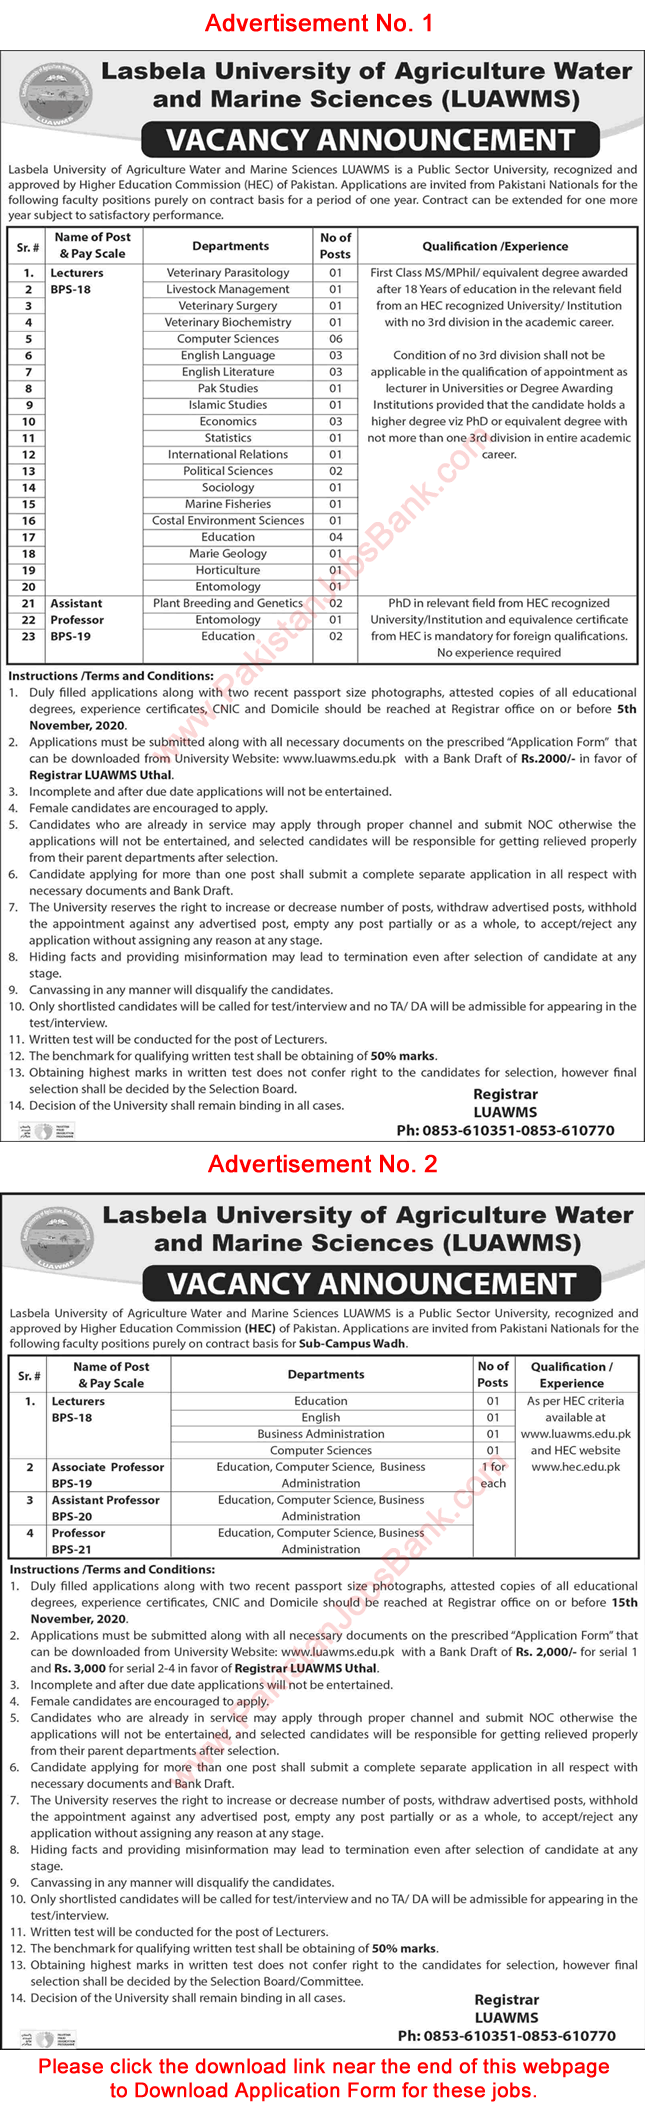 Teaching Faculty Jobs in LUAWMS University October 2020 Application Form Latest